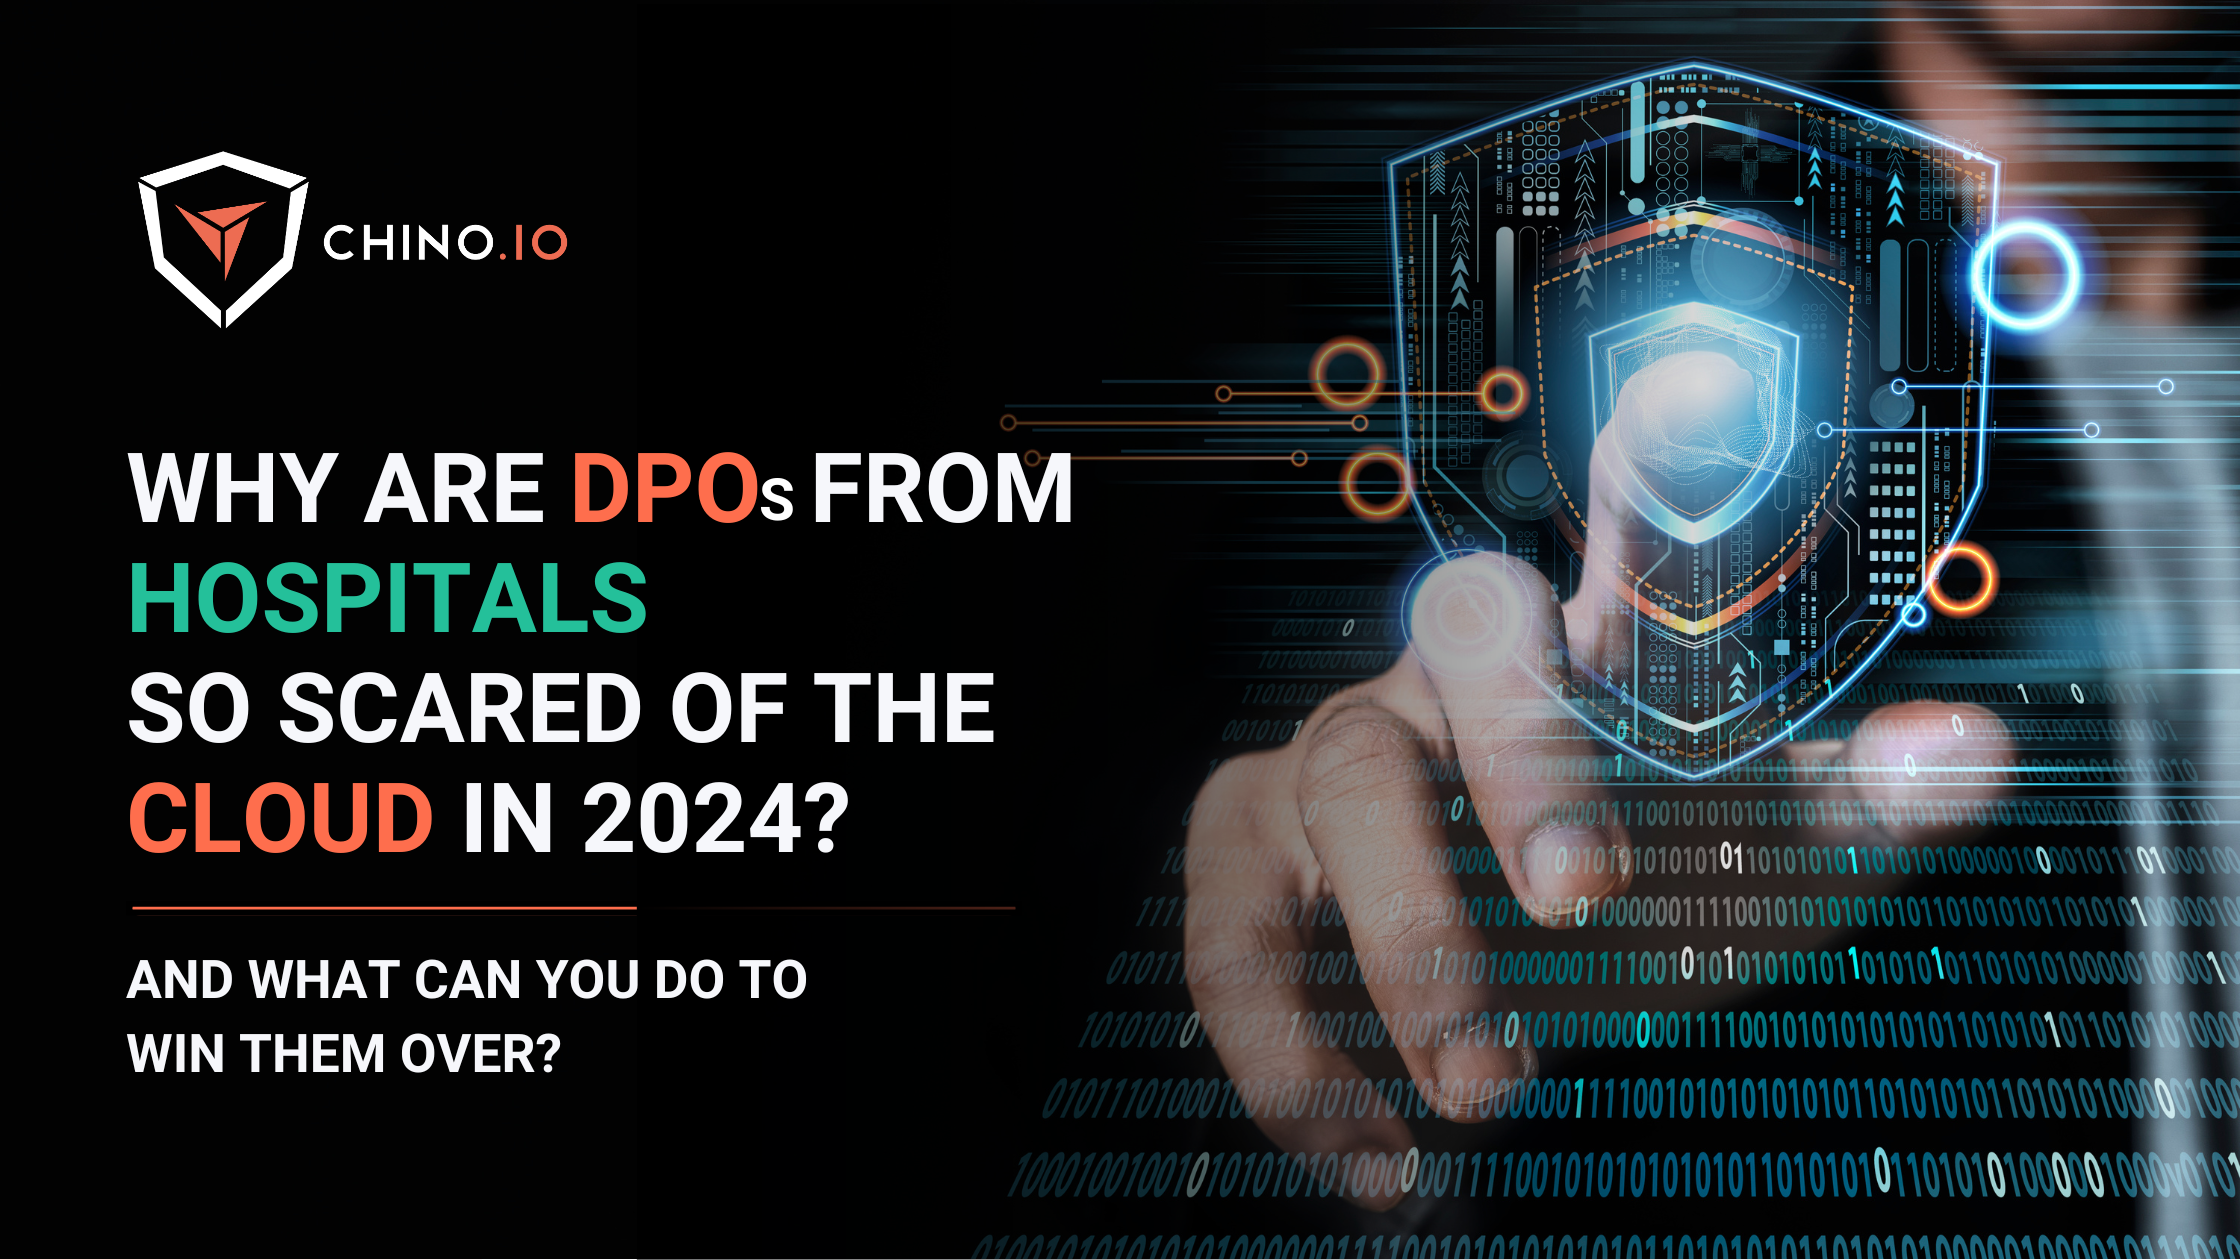 Why are DPOs from hospitals so scared of the cloud in 2024?